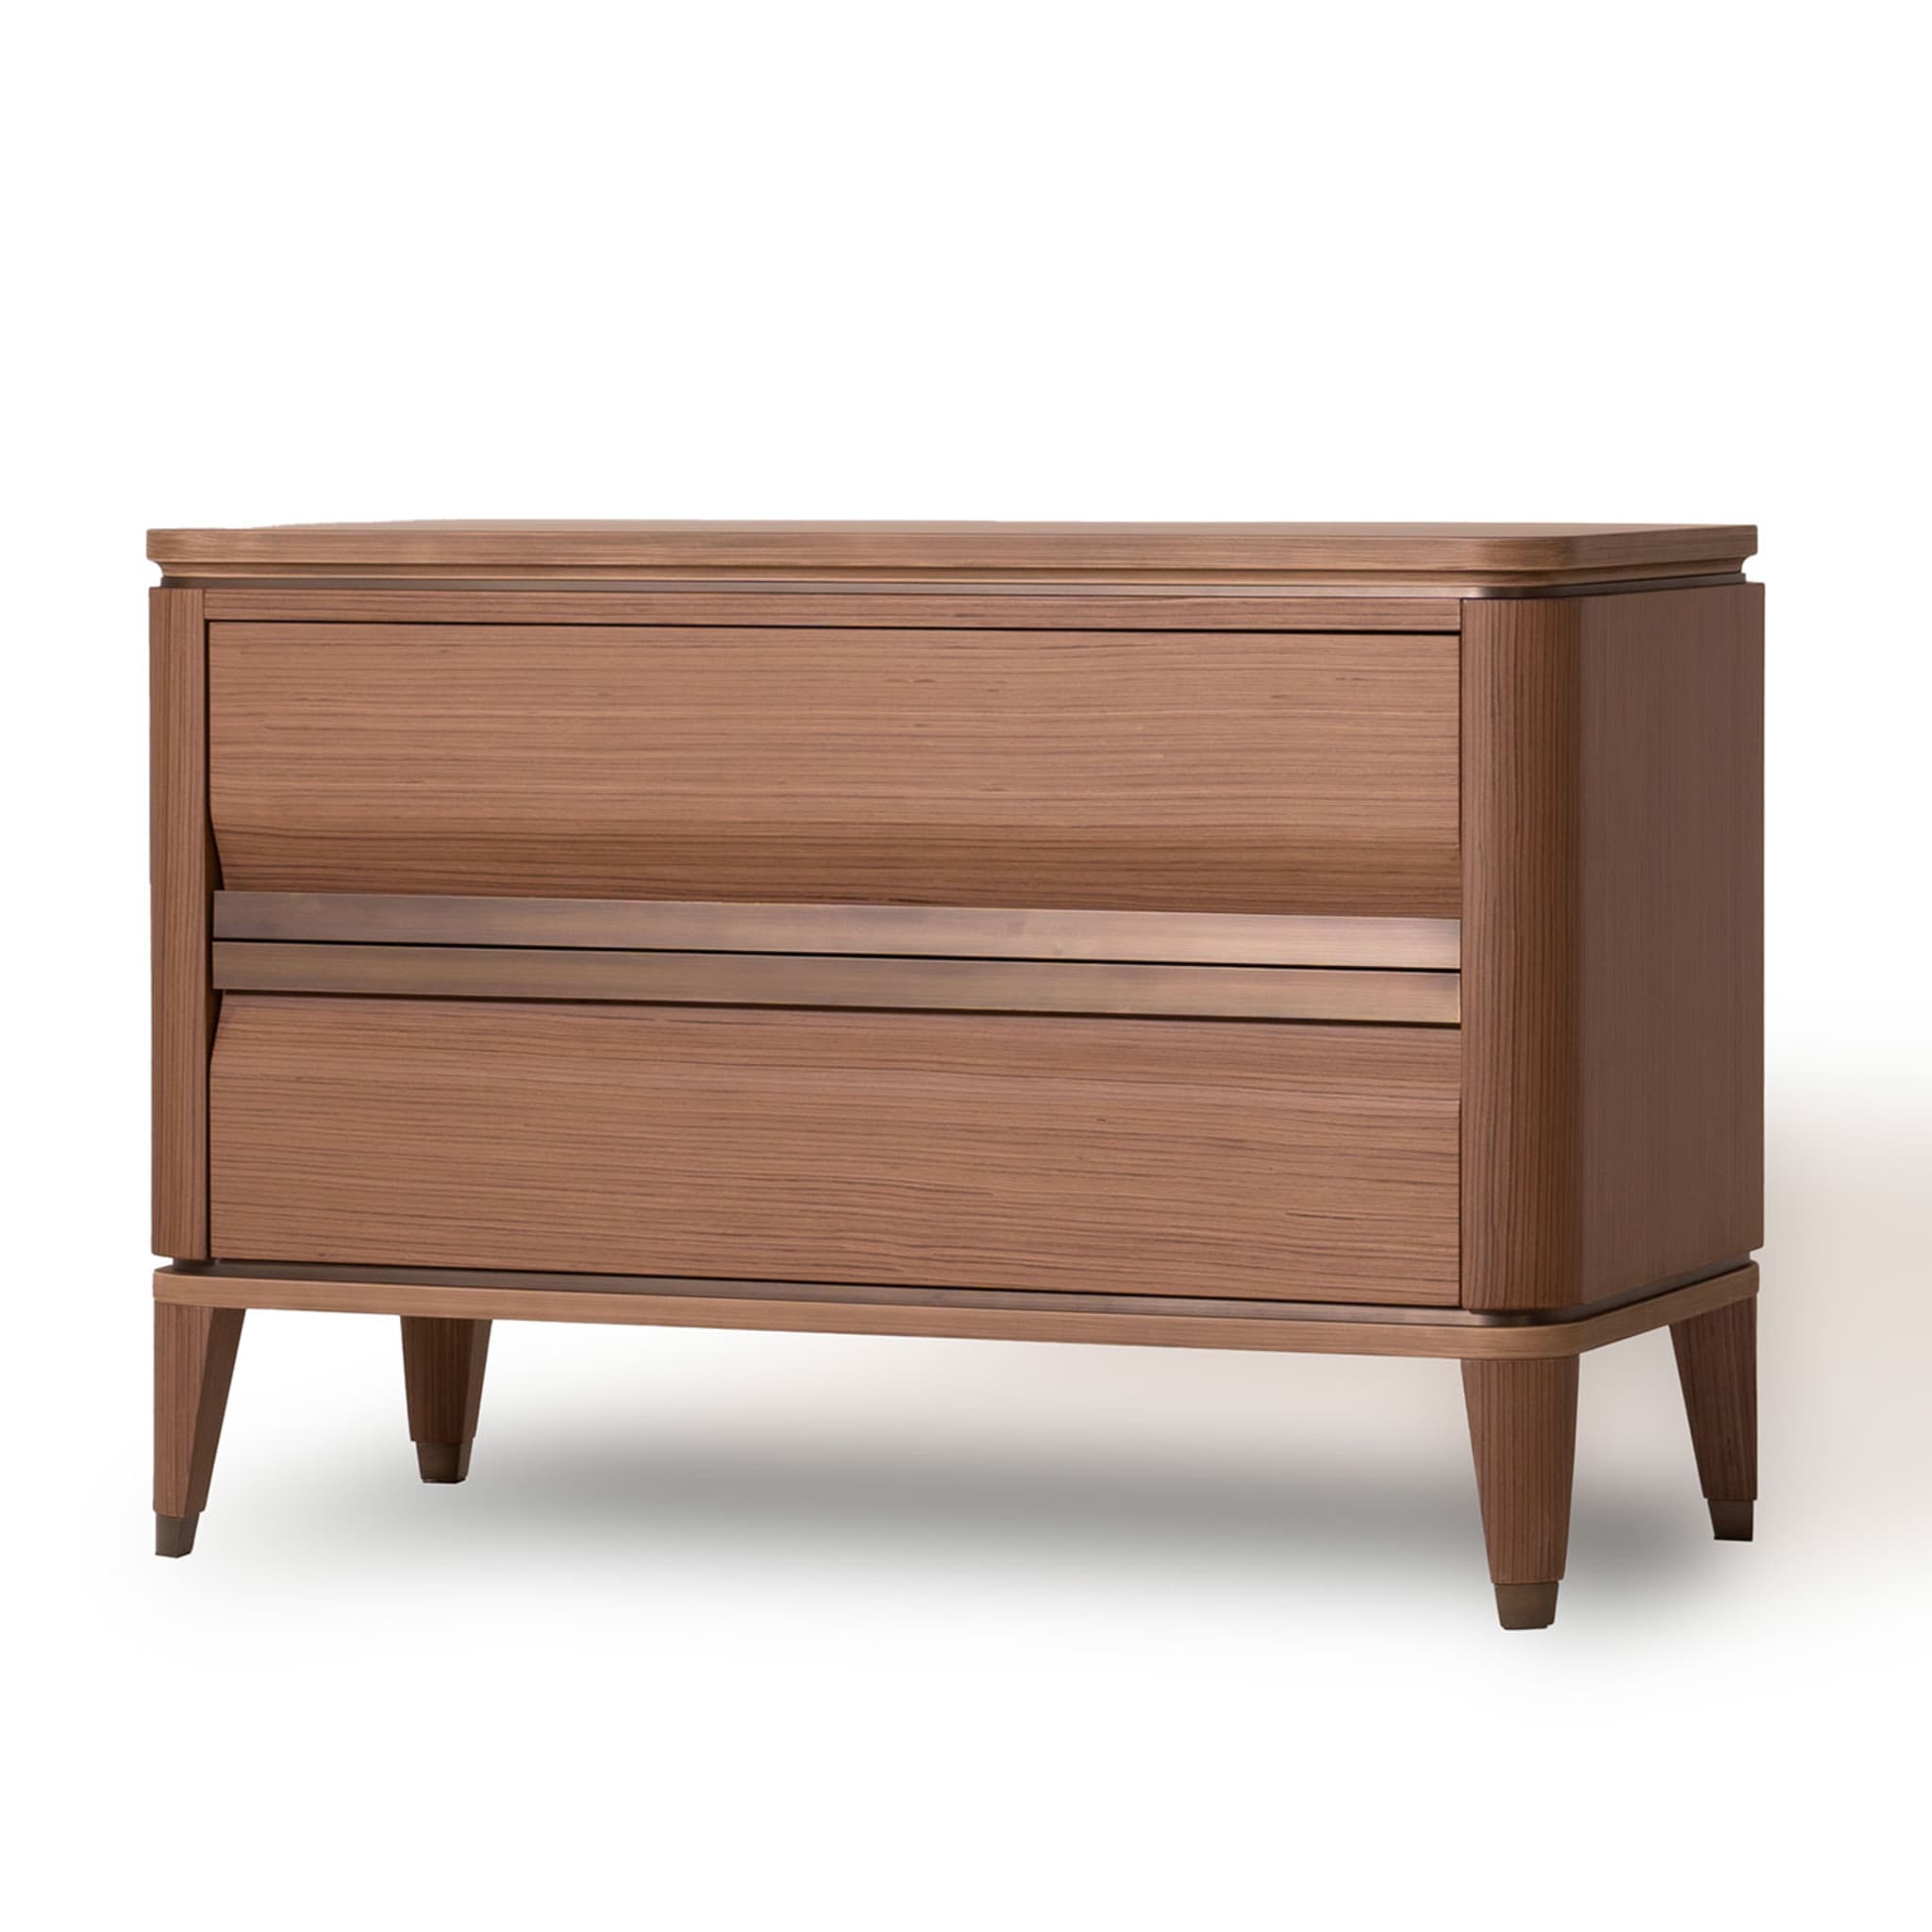 Ercolino Night Stand Extra Large with Rosewood Finish  - Alternative view 2